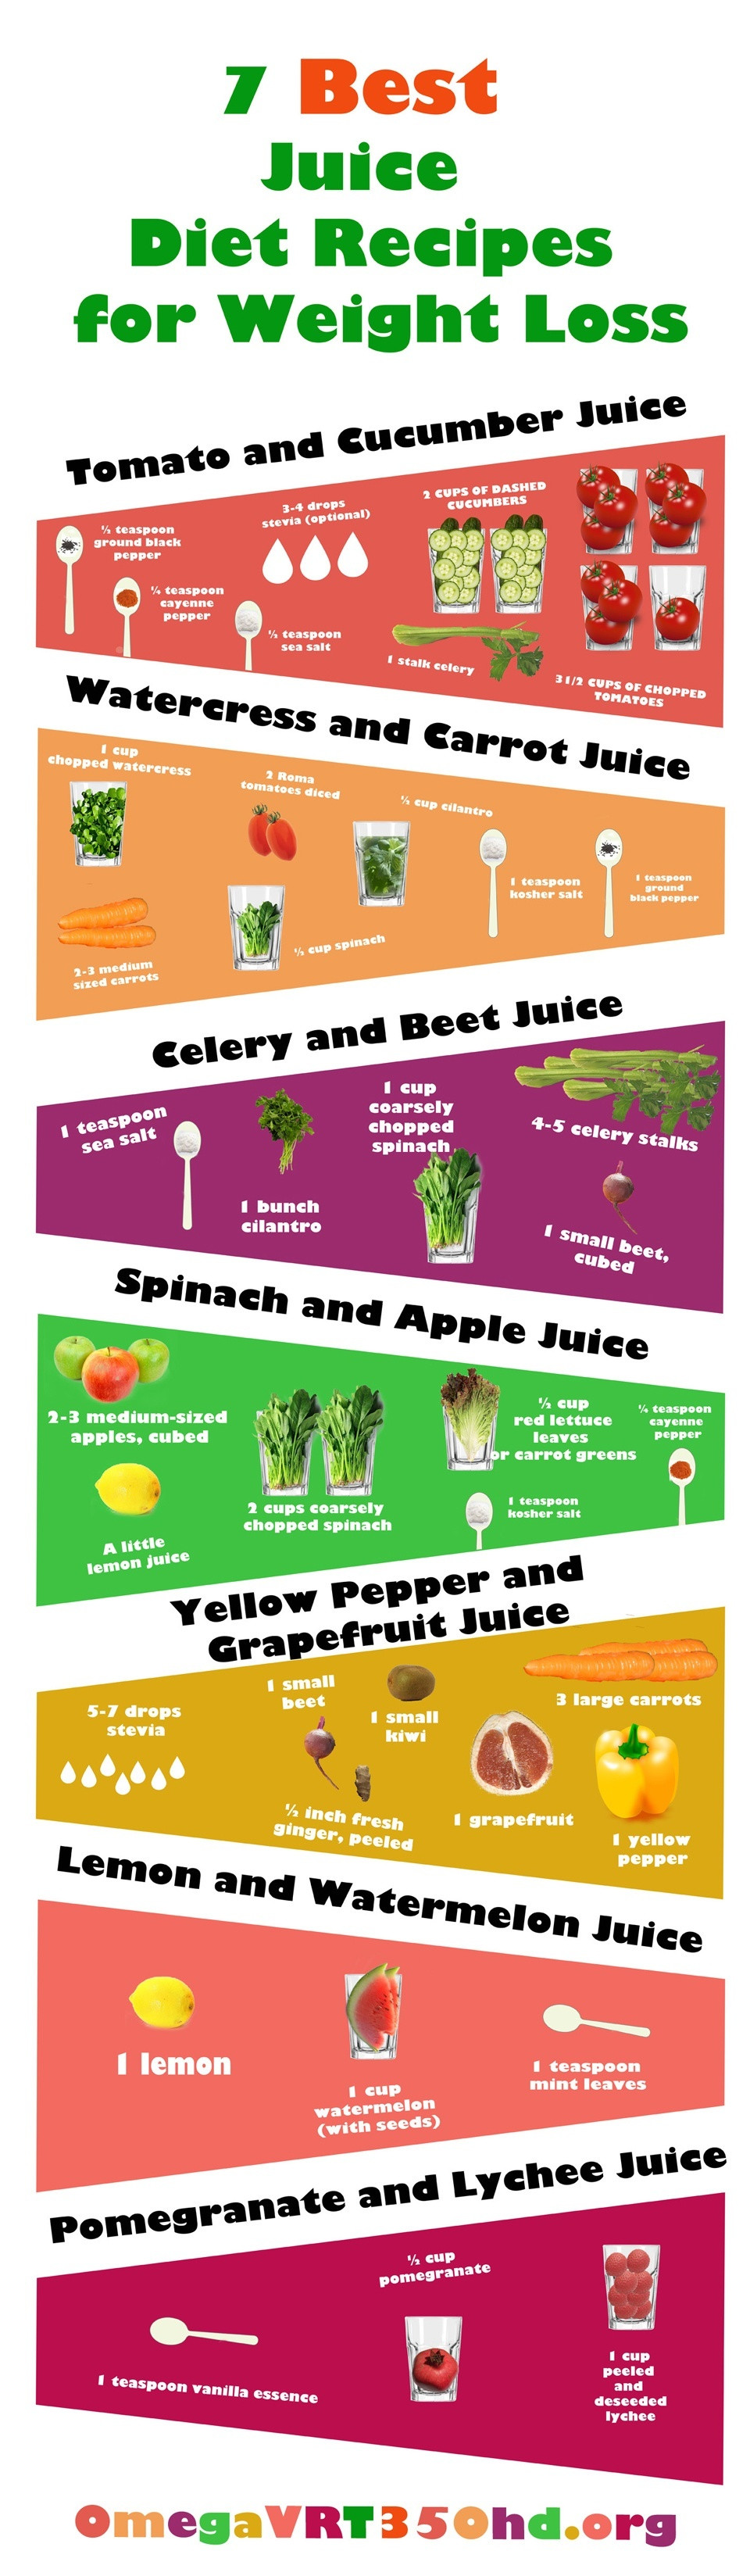 Best Juice Recipes For Weight Loss
 7 Simple Juicing Recipes for Weight Loss Infographic